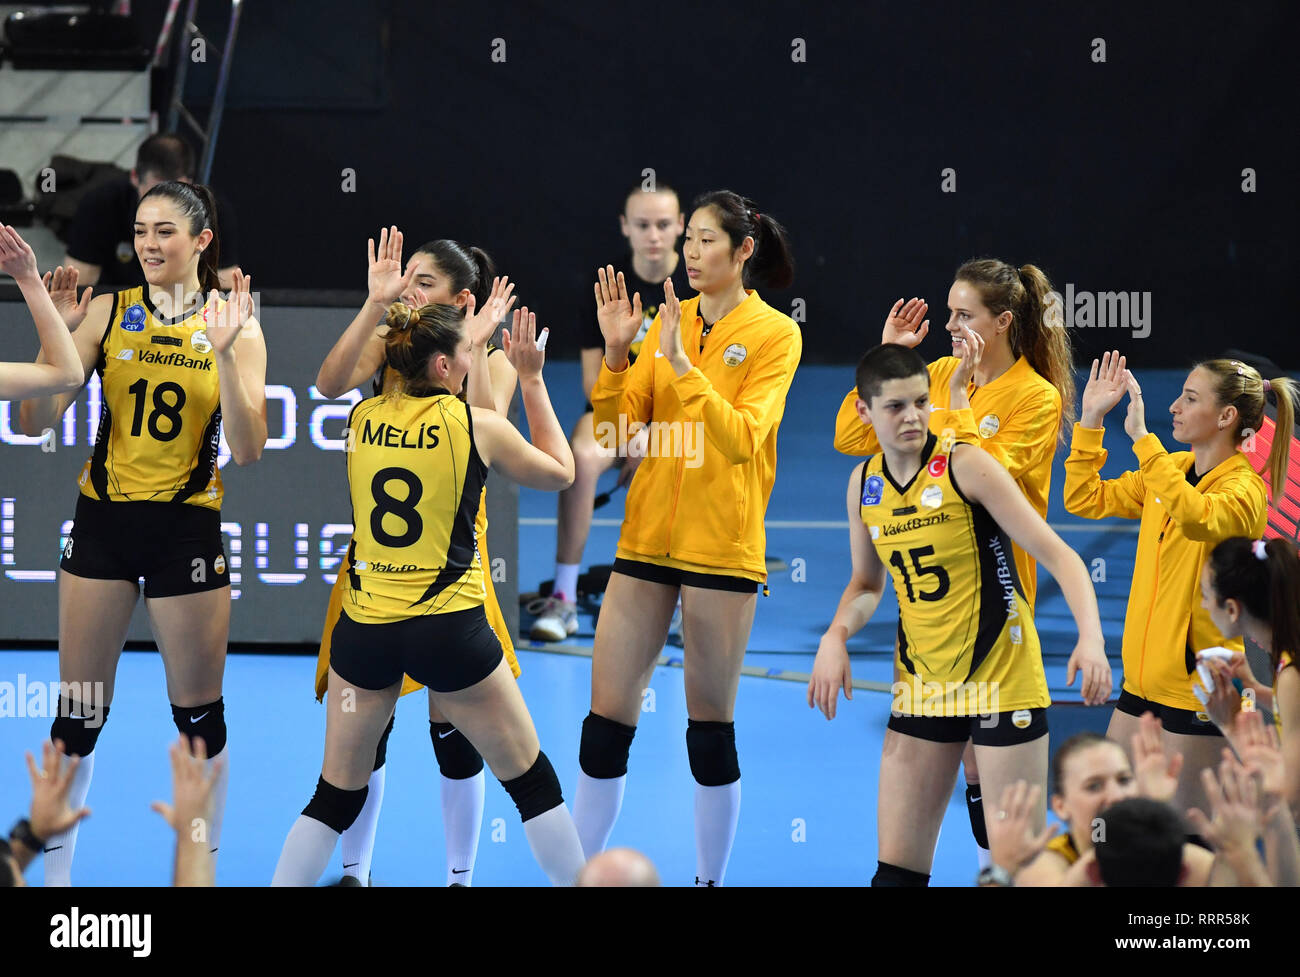 Istanbul, Turkey. 26th Feb, 2019. Chinese volleyball player Zhu Ting (C) of  Vakifbank and her teamates cheers prior to the group match between Vakifbank  Istanbul of Turkey and Beziers VB of France